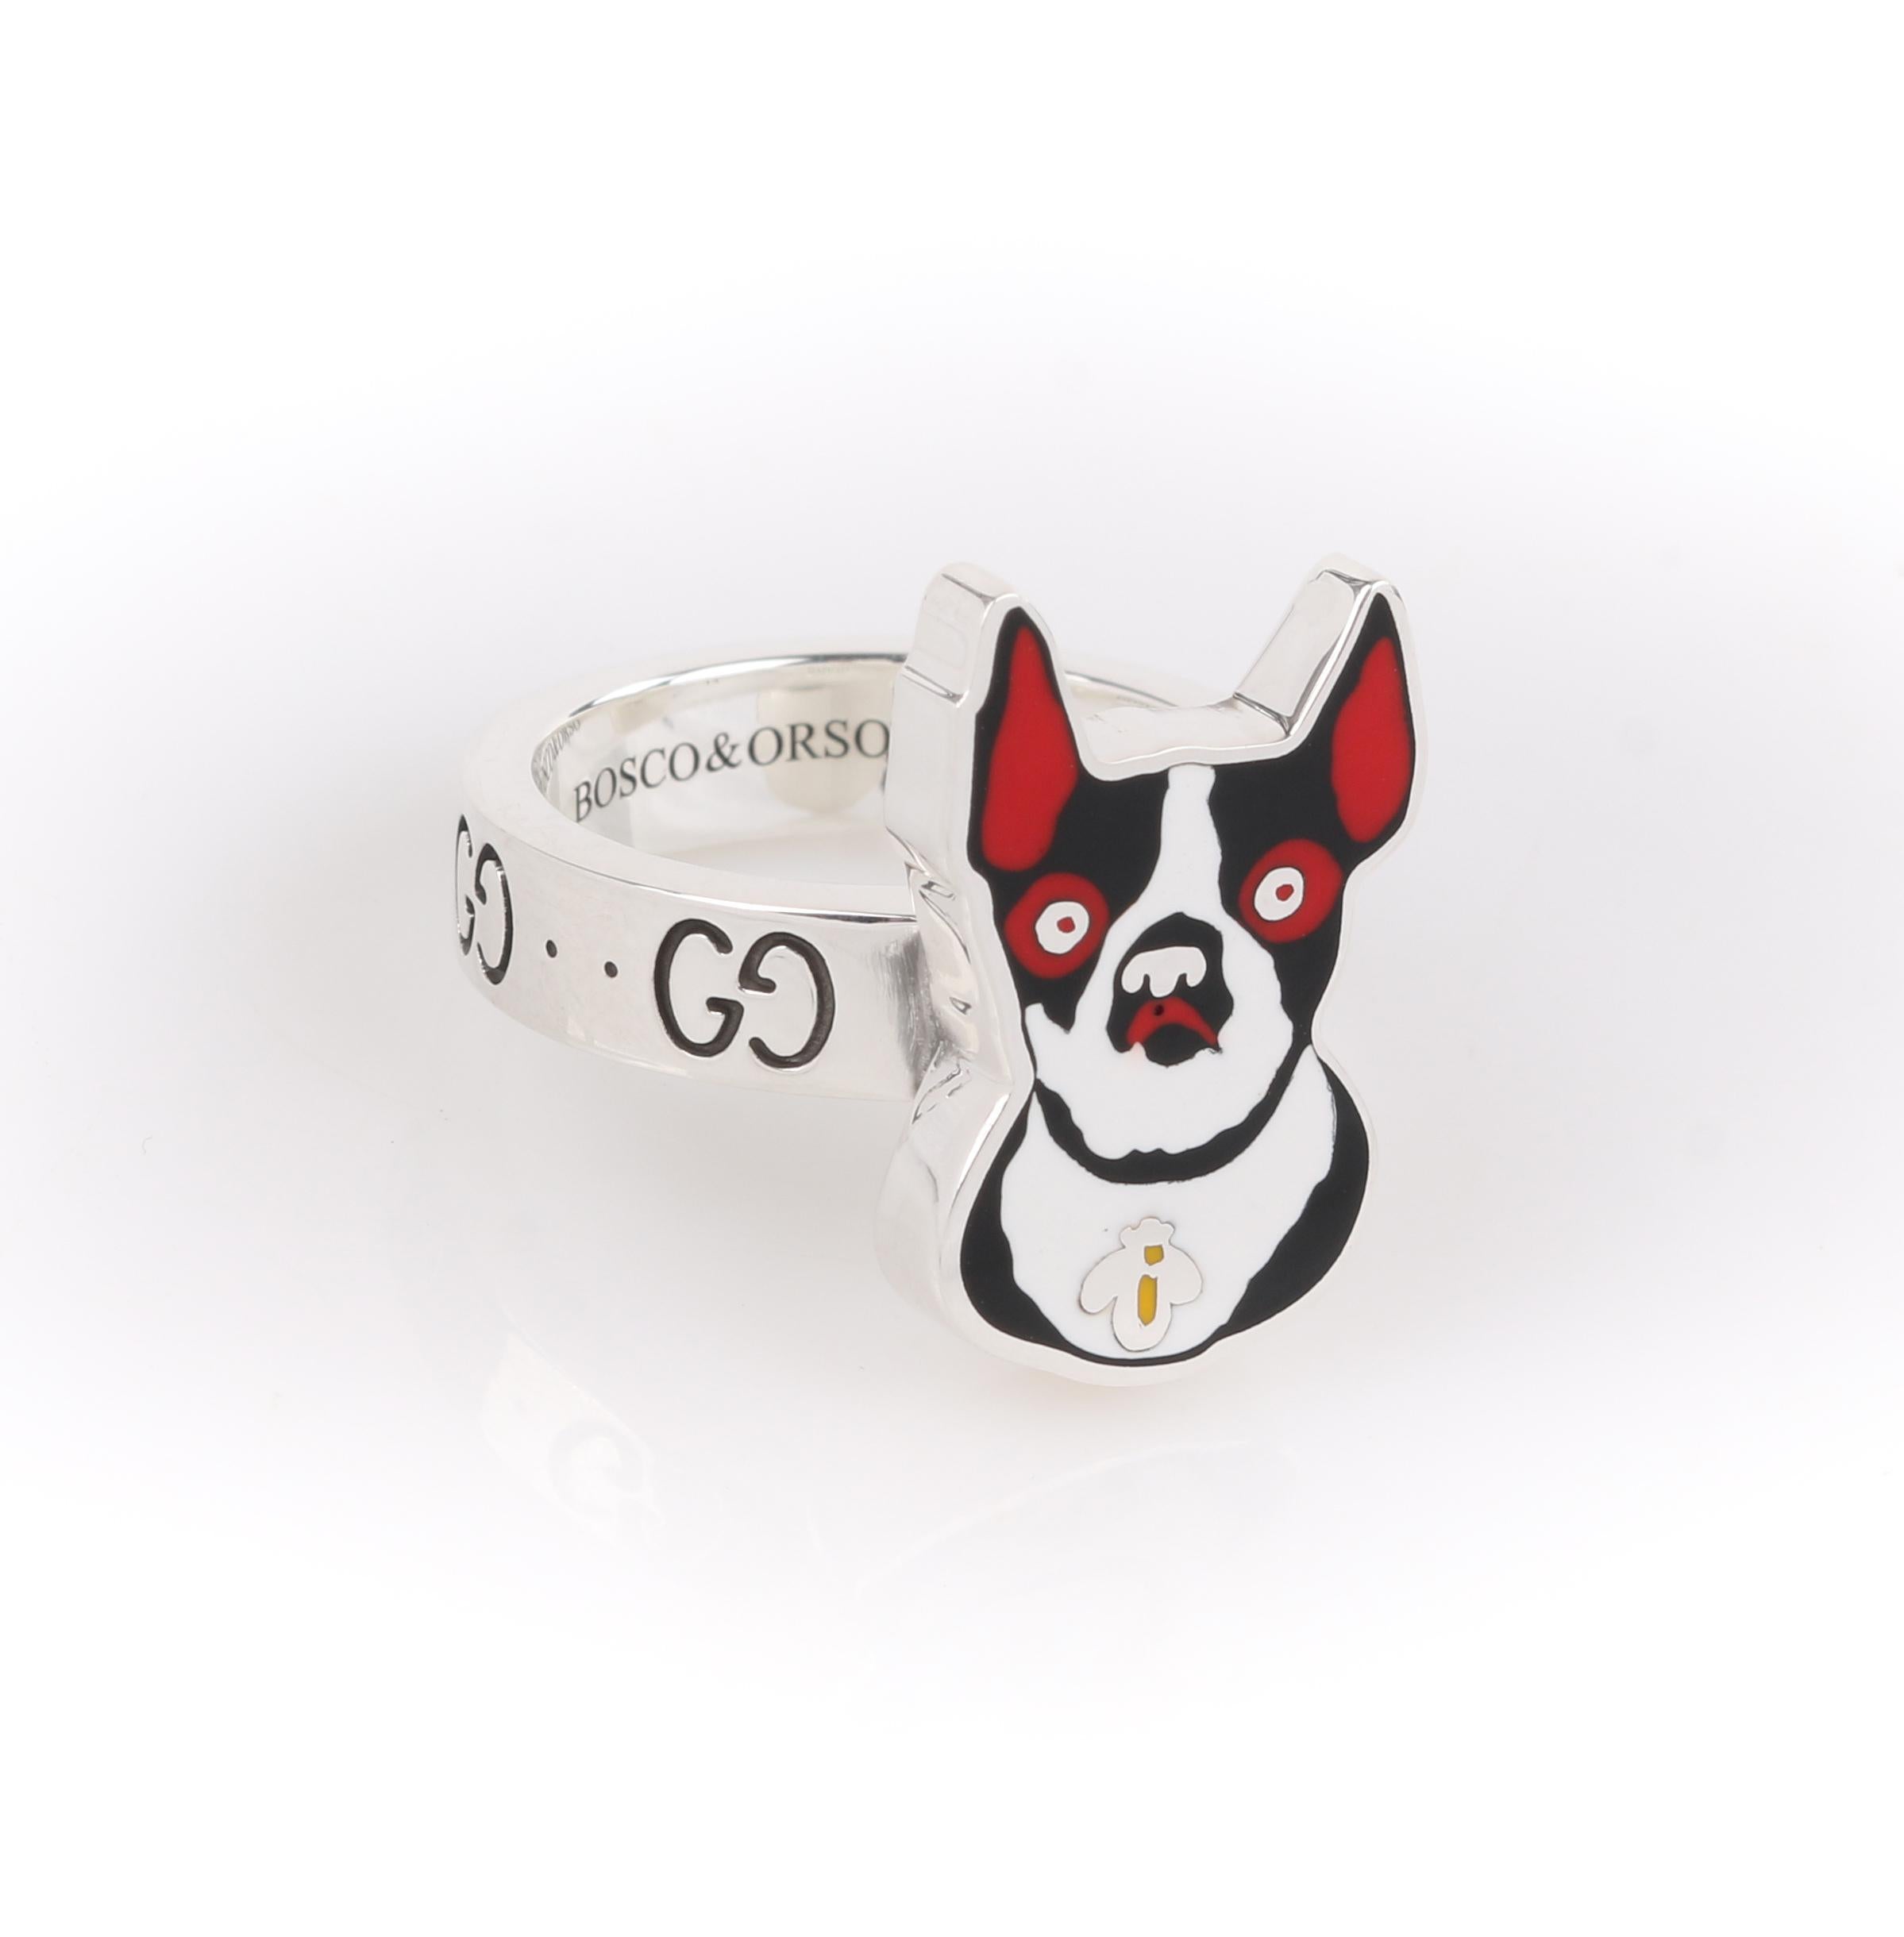 Gucci Dog - 3 For Sale on 1stDibs | gucci for dogs, gucci dog 